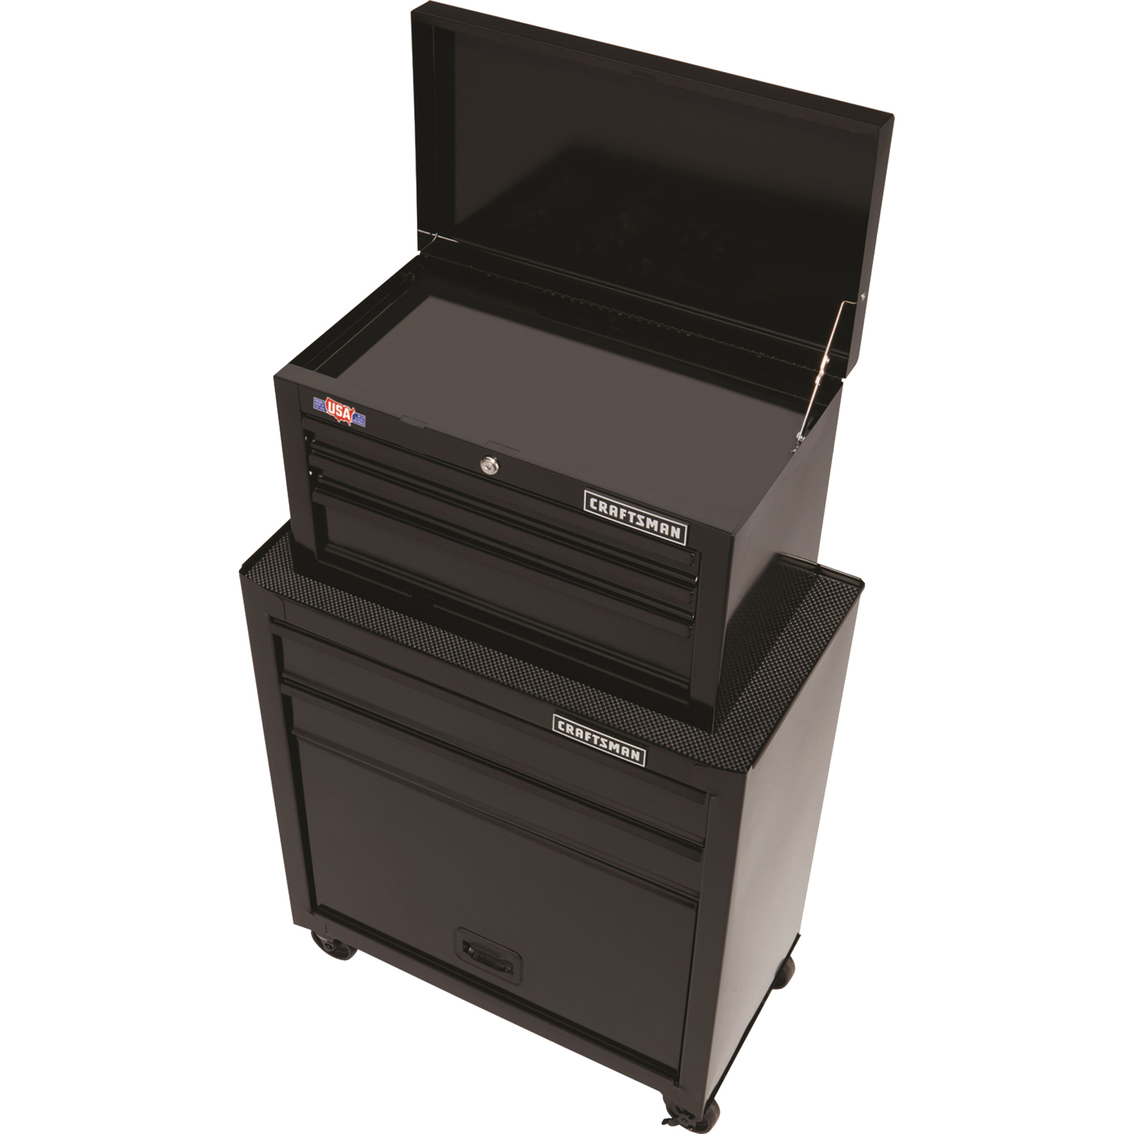 14inch 2 drawers small tool box